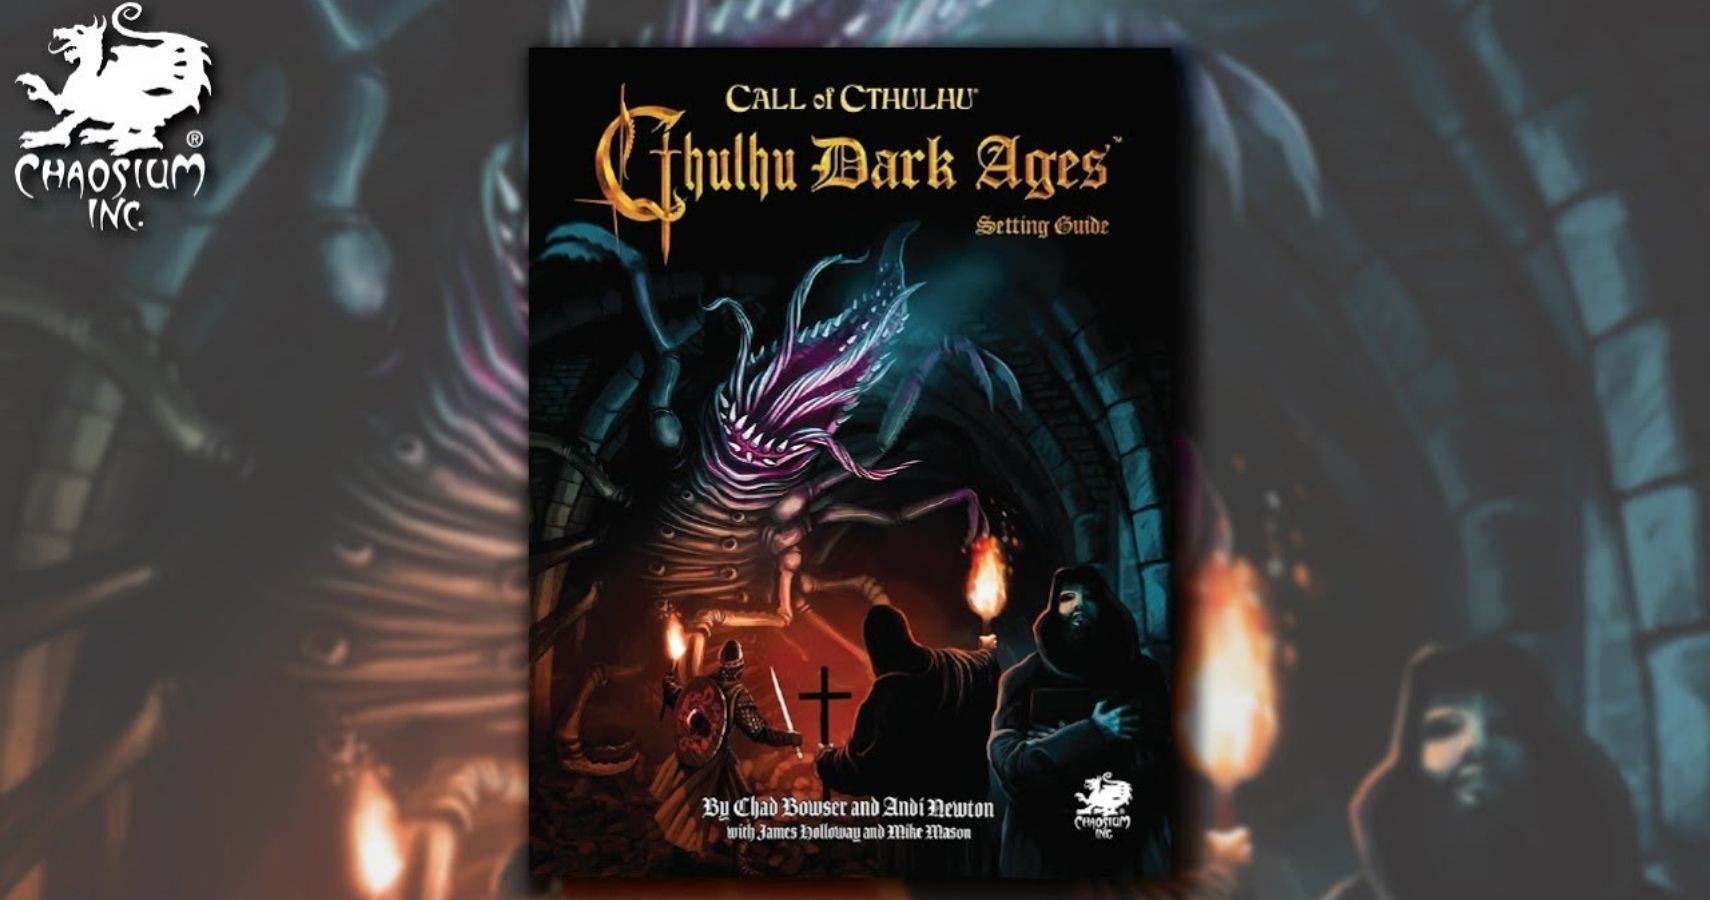 Download These Cthulhu Dark Ages Handouts And Pregen Characters For Free